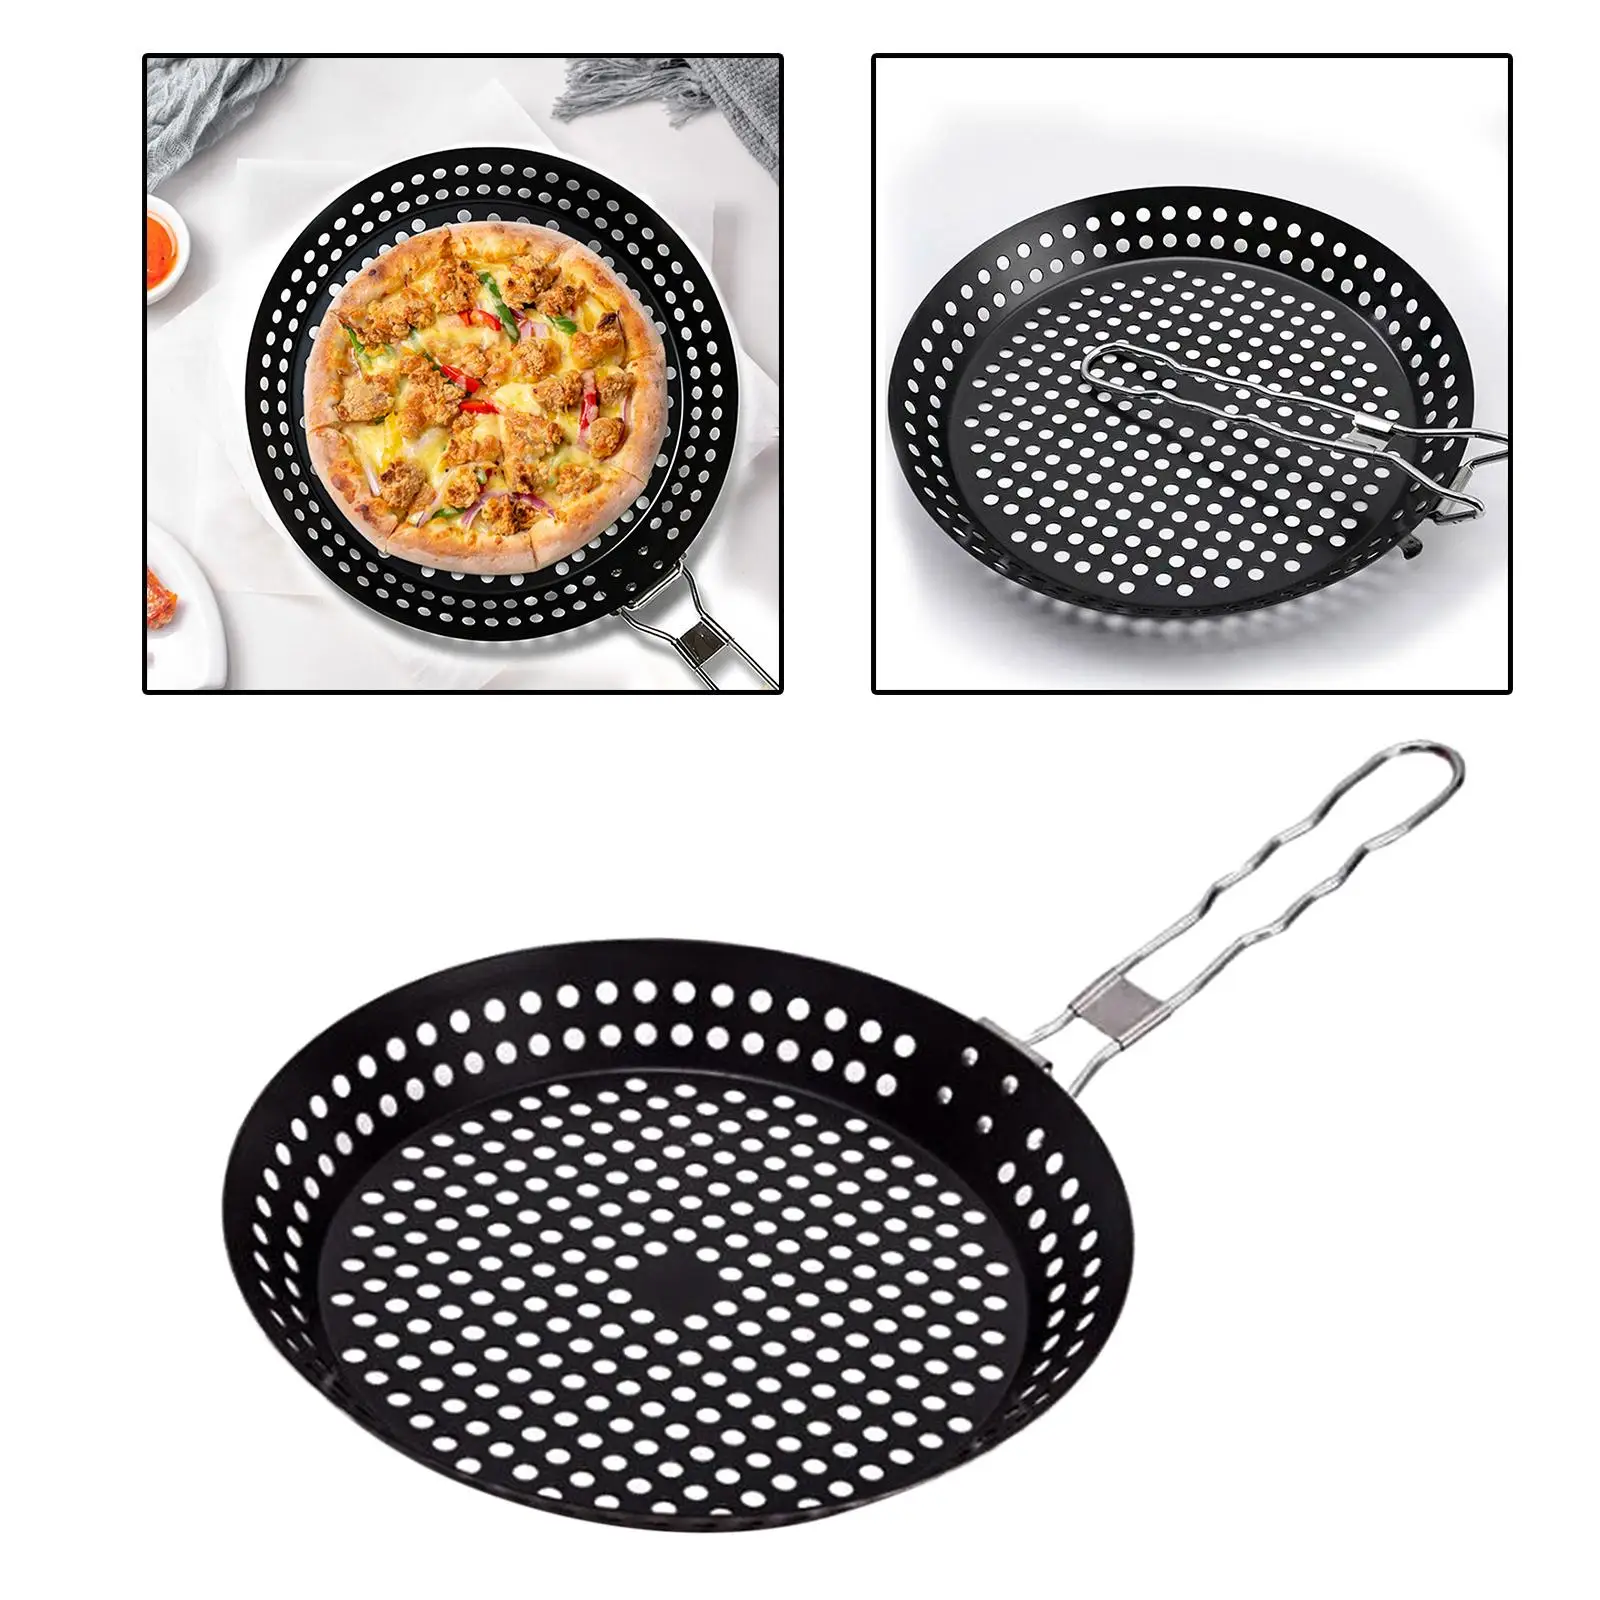 Portable Barbecue Basket Roasting Plate Barbecue Plate for Pizza Chicken Seafood